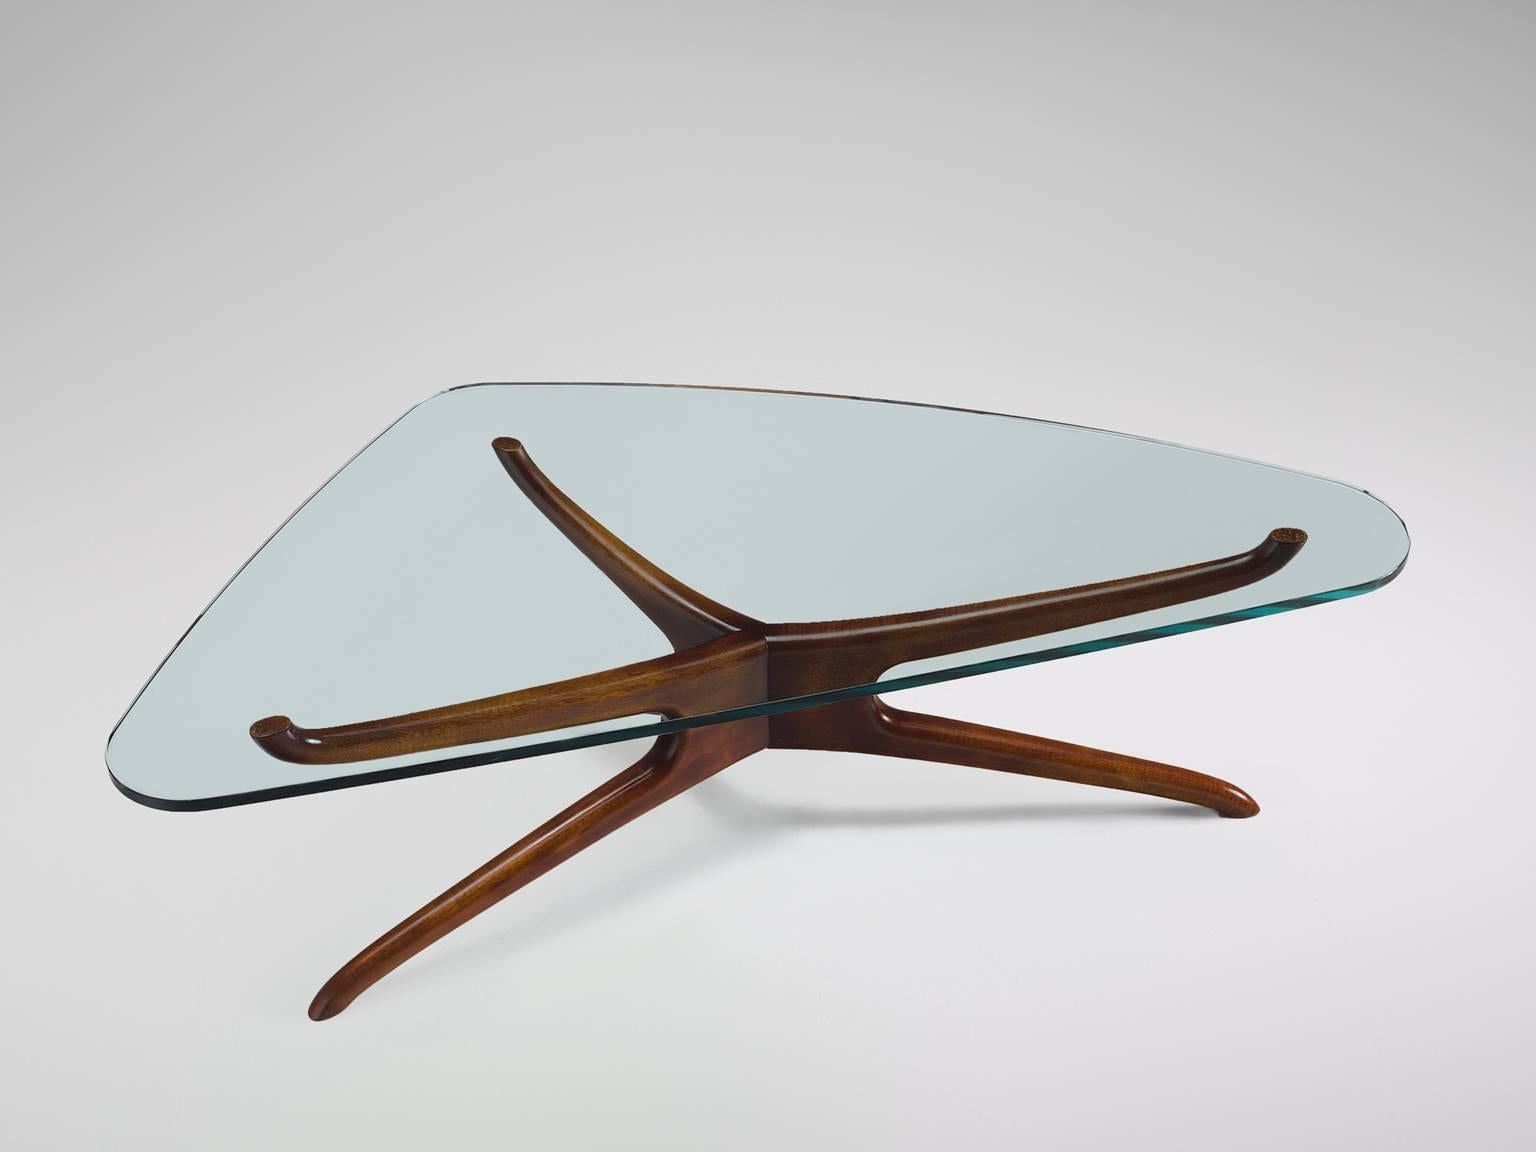 Vladimir Kagan, side table, walnut, glass, United States, 1960s.

This sculptural cocktail table by Vladimir Kagan is part of the midcentury design collection. The flowing, organic base is topped with a biomorphic glass top. The three-legged